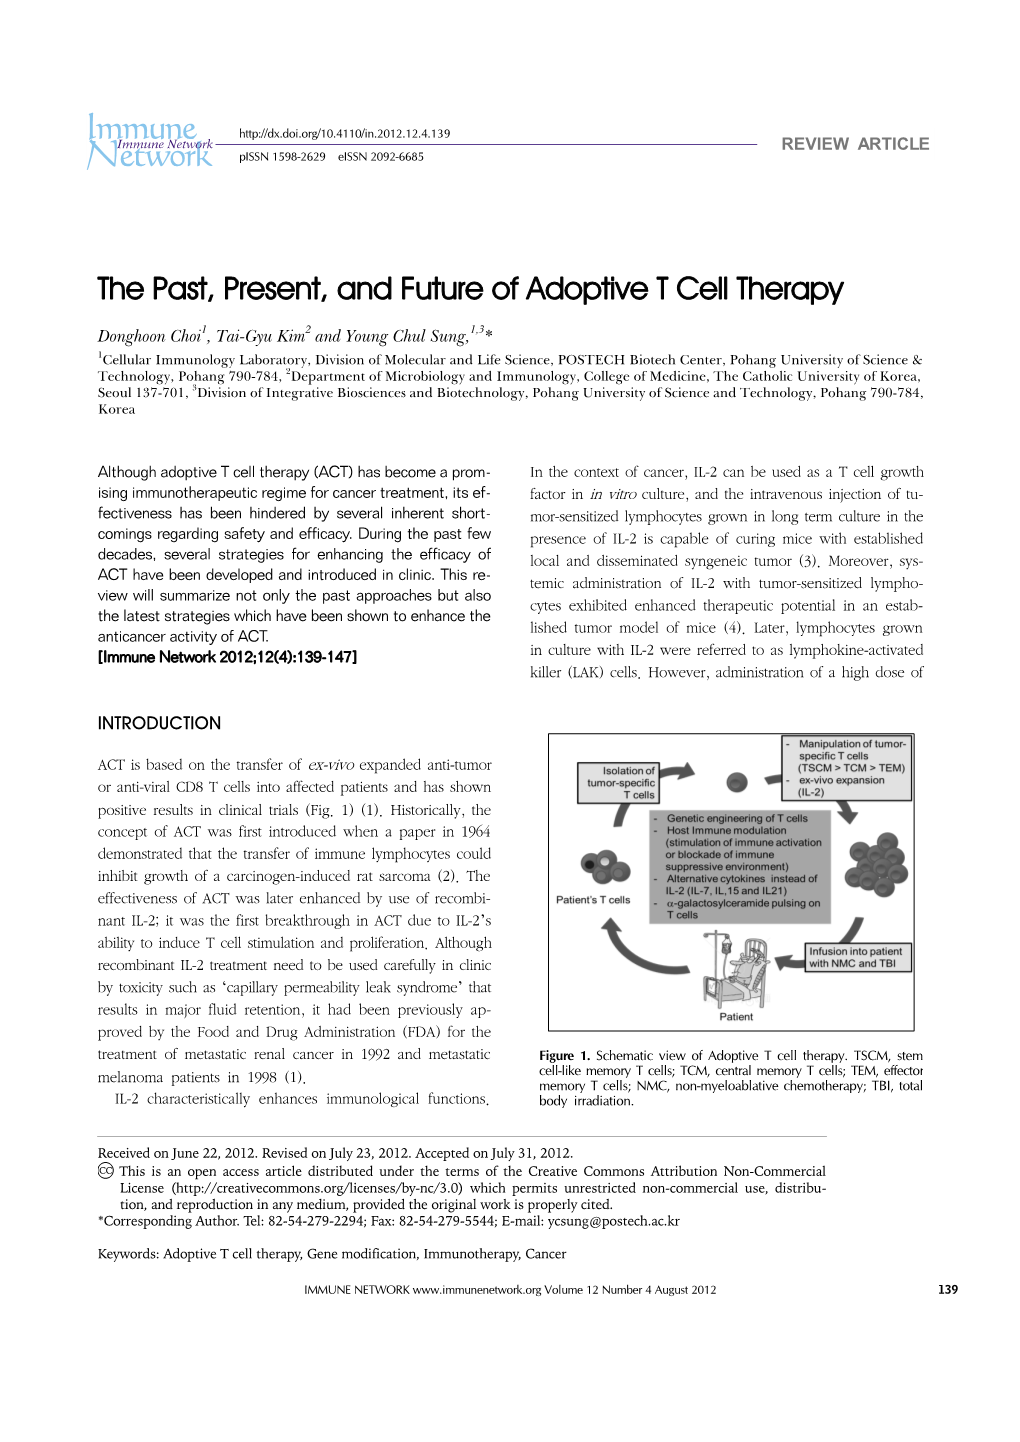 The Past, Present, and Future of Adoptive T Cell Therapy